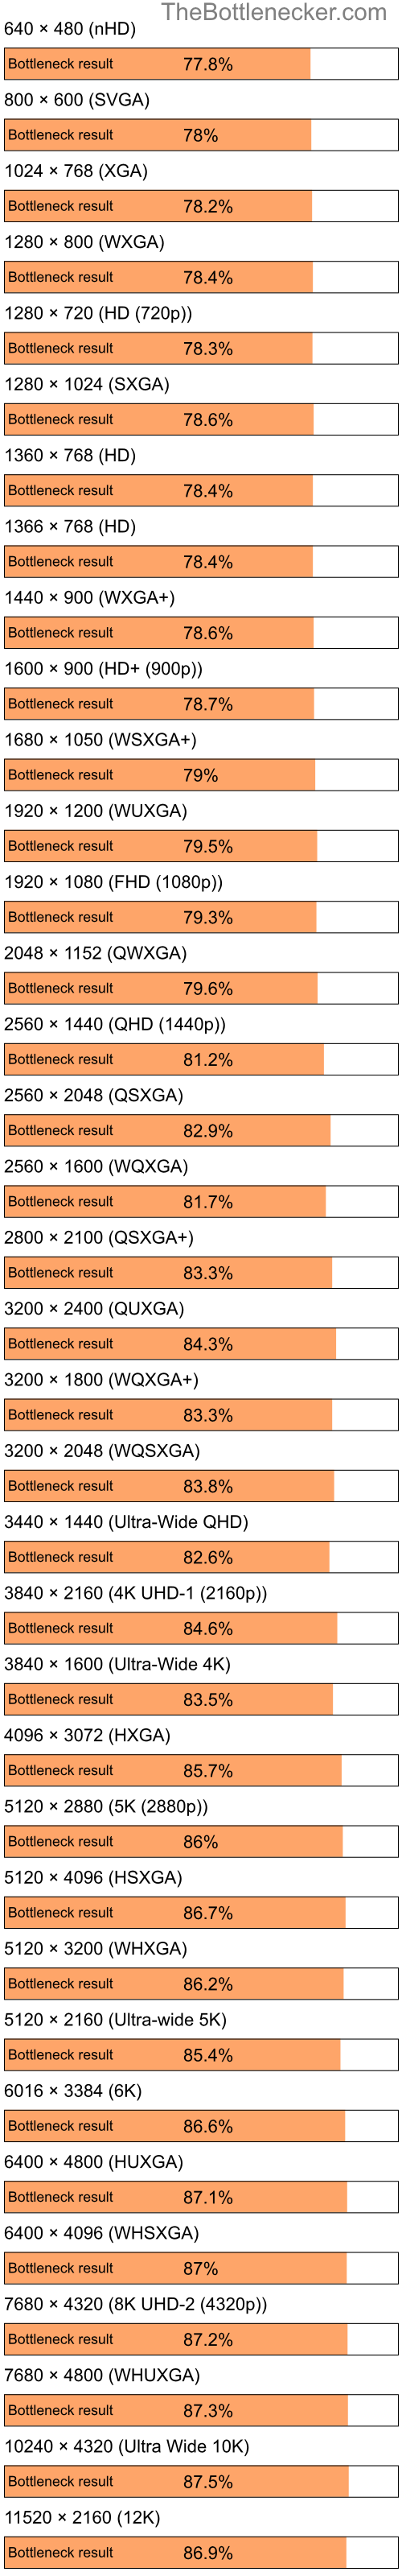 Bottleneck results by resolution for Intel Pentium 4 and NVIDIA GeForce 6600 LE in Graphic Card Intense Tasks